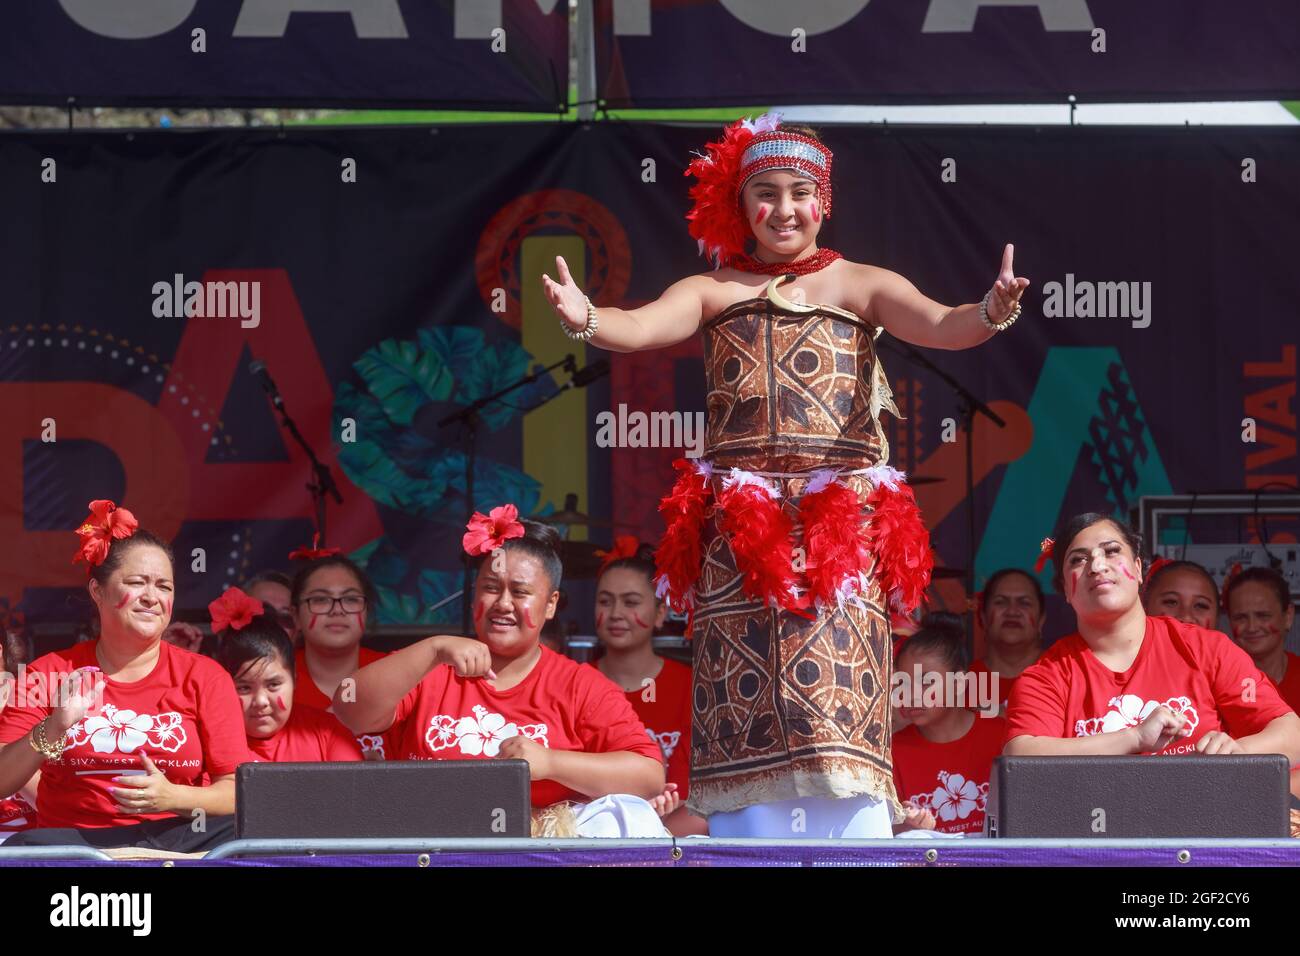 A Samoan girl wearing tapa cloth dancing at Pasifika Festival, a showcase of Pasific Island culture in Auckland, New Zealand Stock Photo